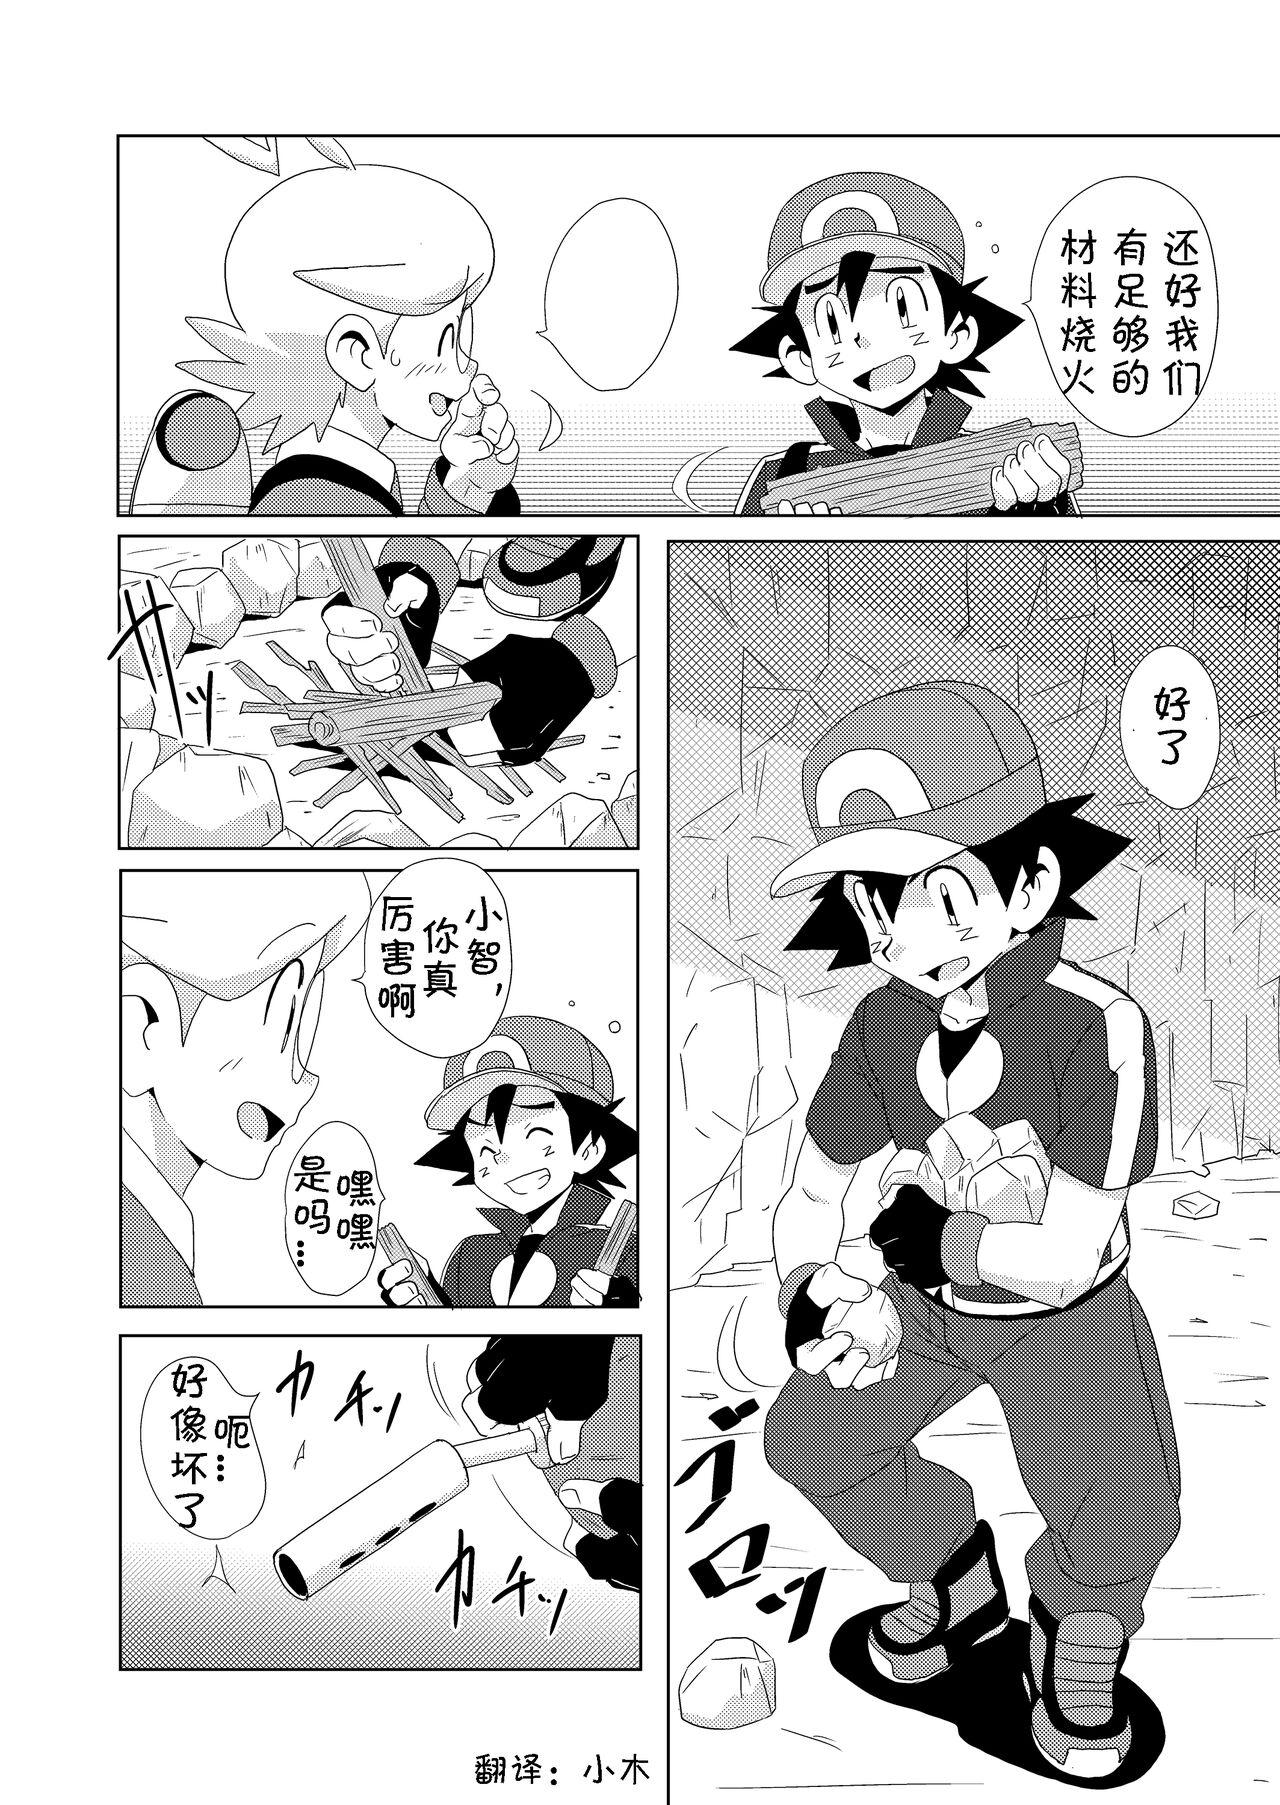 Assfucking The Rainbow Connection - Pokemon | pocket monsters Lez Fuck - Page 4